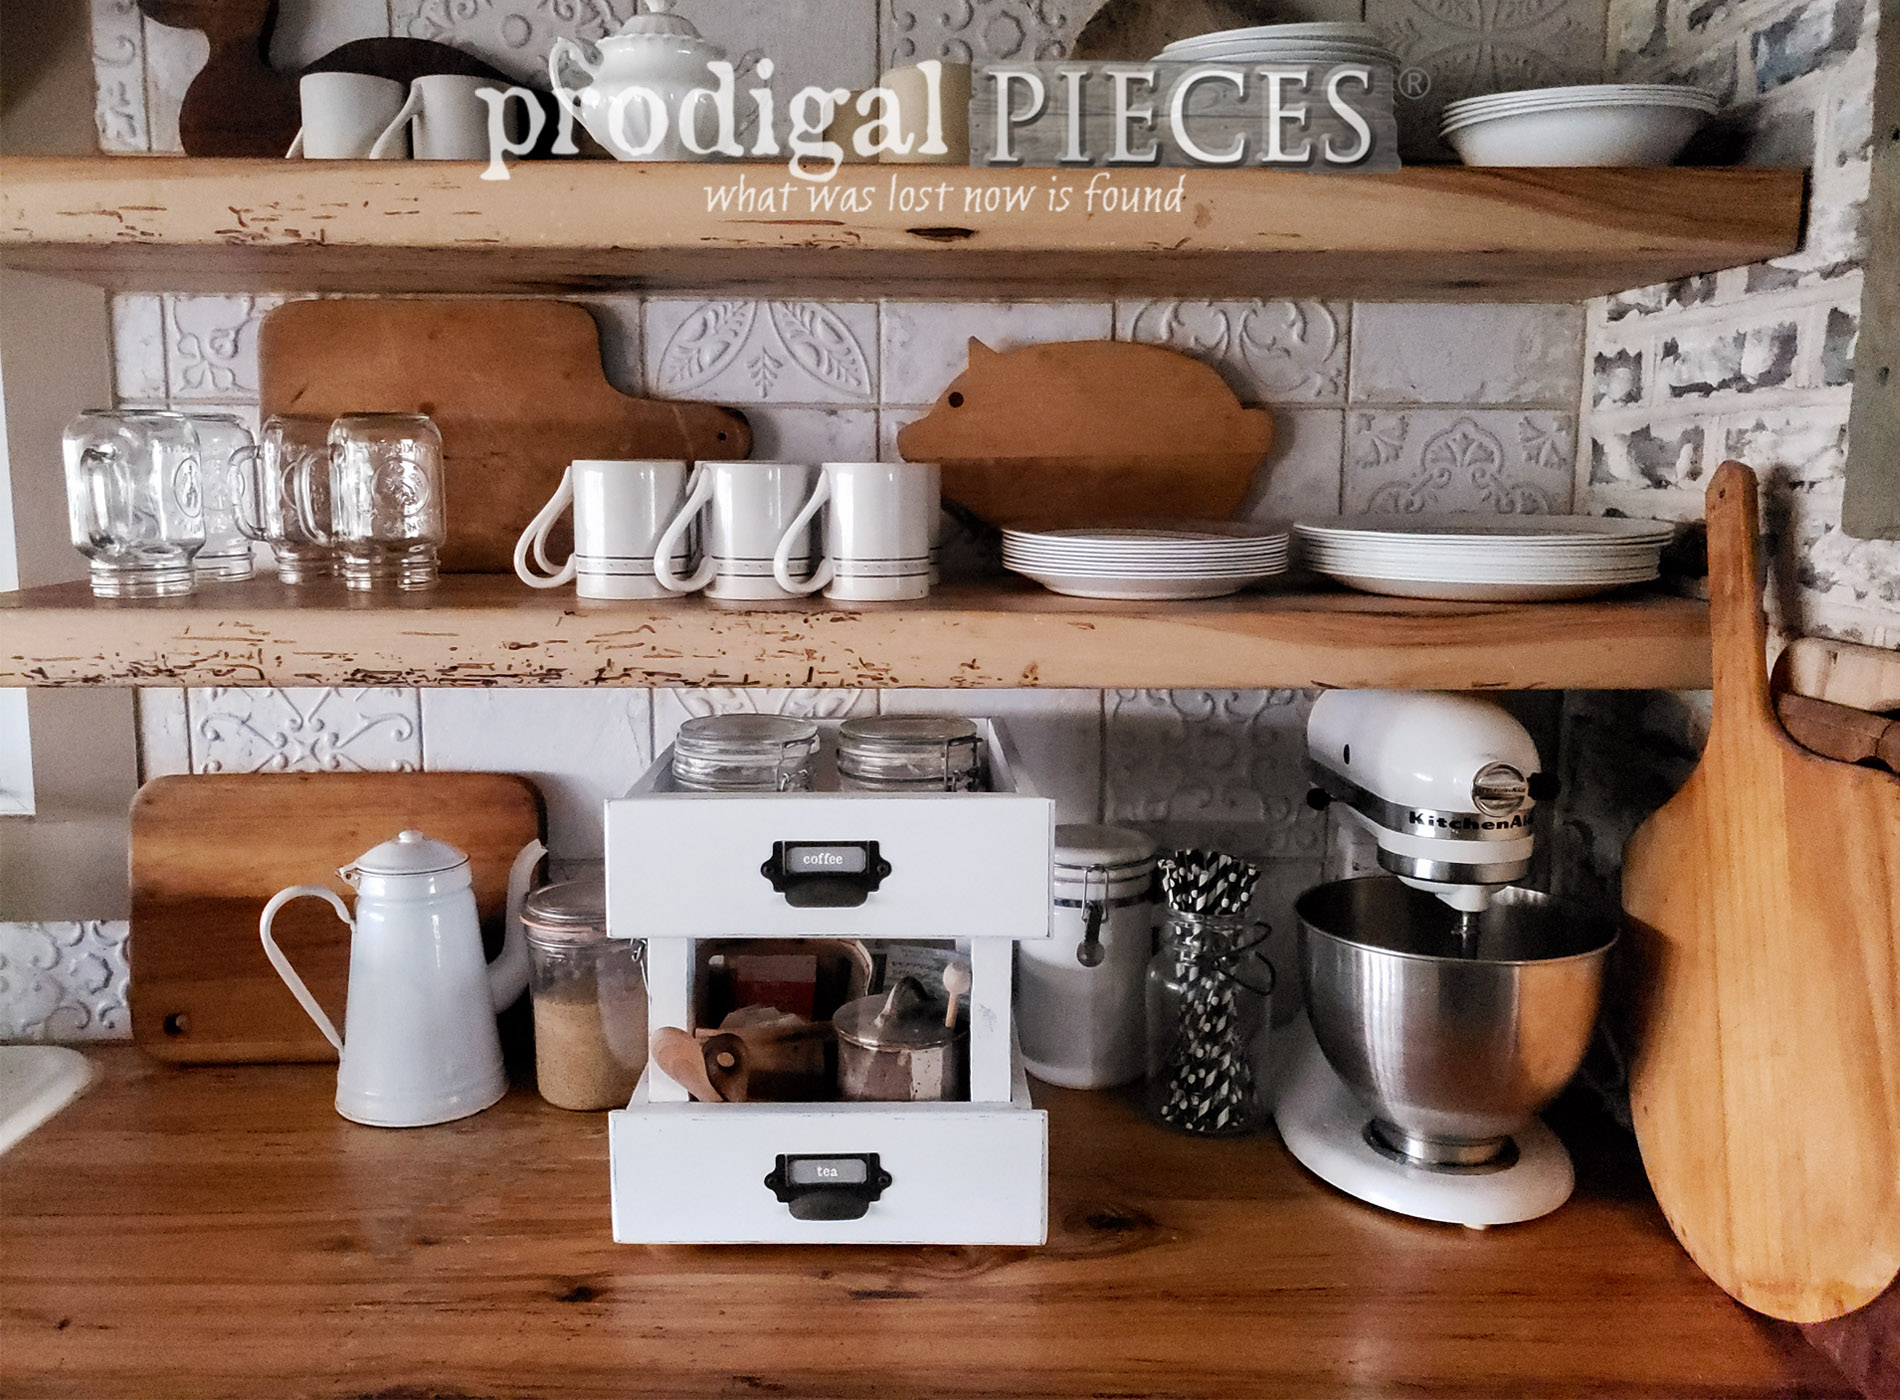 Featured Upcycled Drawers Tiered Stand DIY by Larissa of Prodigal Pieces | prodigalpieces.com #prodigalpieces #trashure #farmhouse #diy #home #homedecor #storage